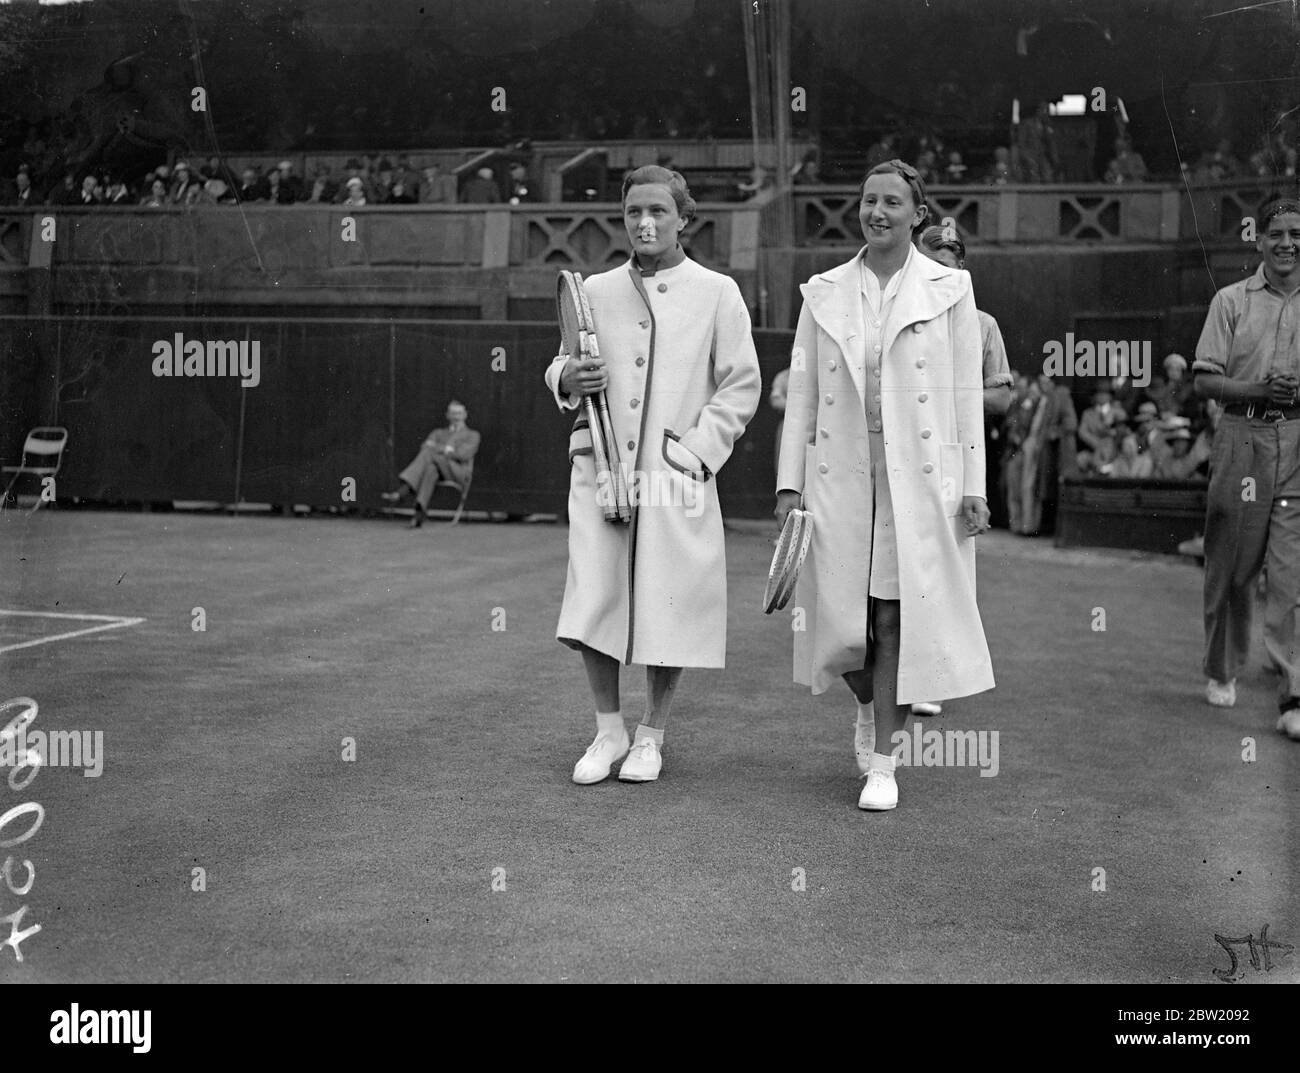 Miss Dorothy Round of Great Britain, defeated Miss Helen Jacobs, the champion, 6-4, 6-2 in the women's singles at Wimbledon. Miss Dorothy Round and Miss Helen Jacobs walking onto the Centre Court for their match. 29 June 1937 Stock Photo